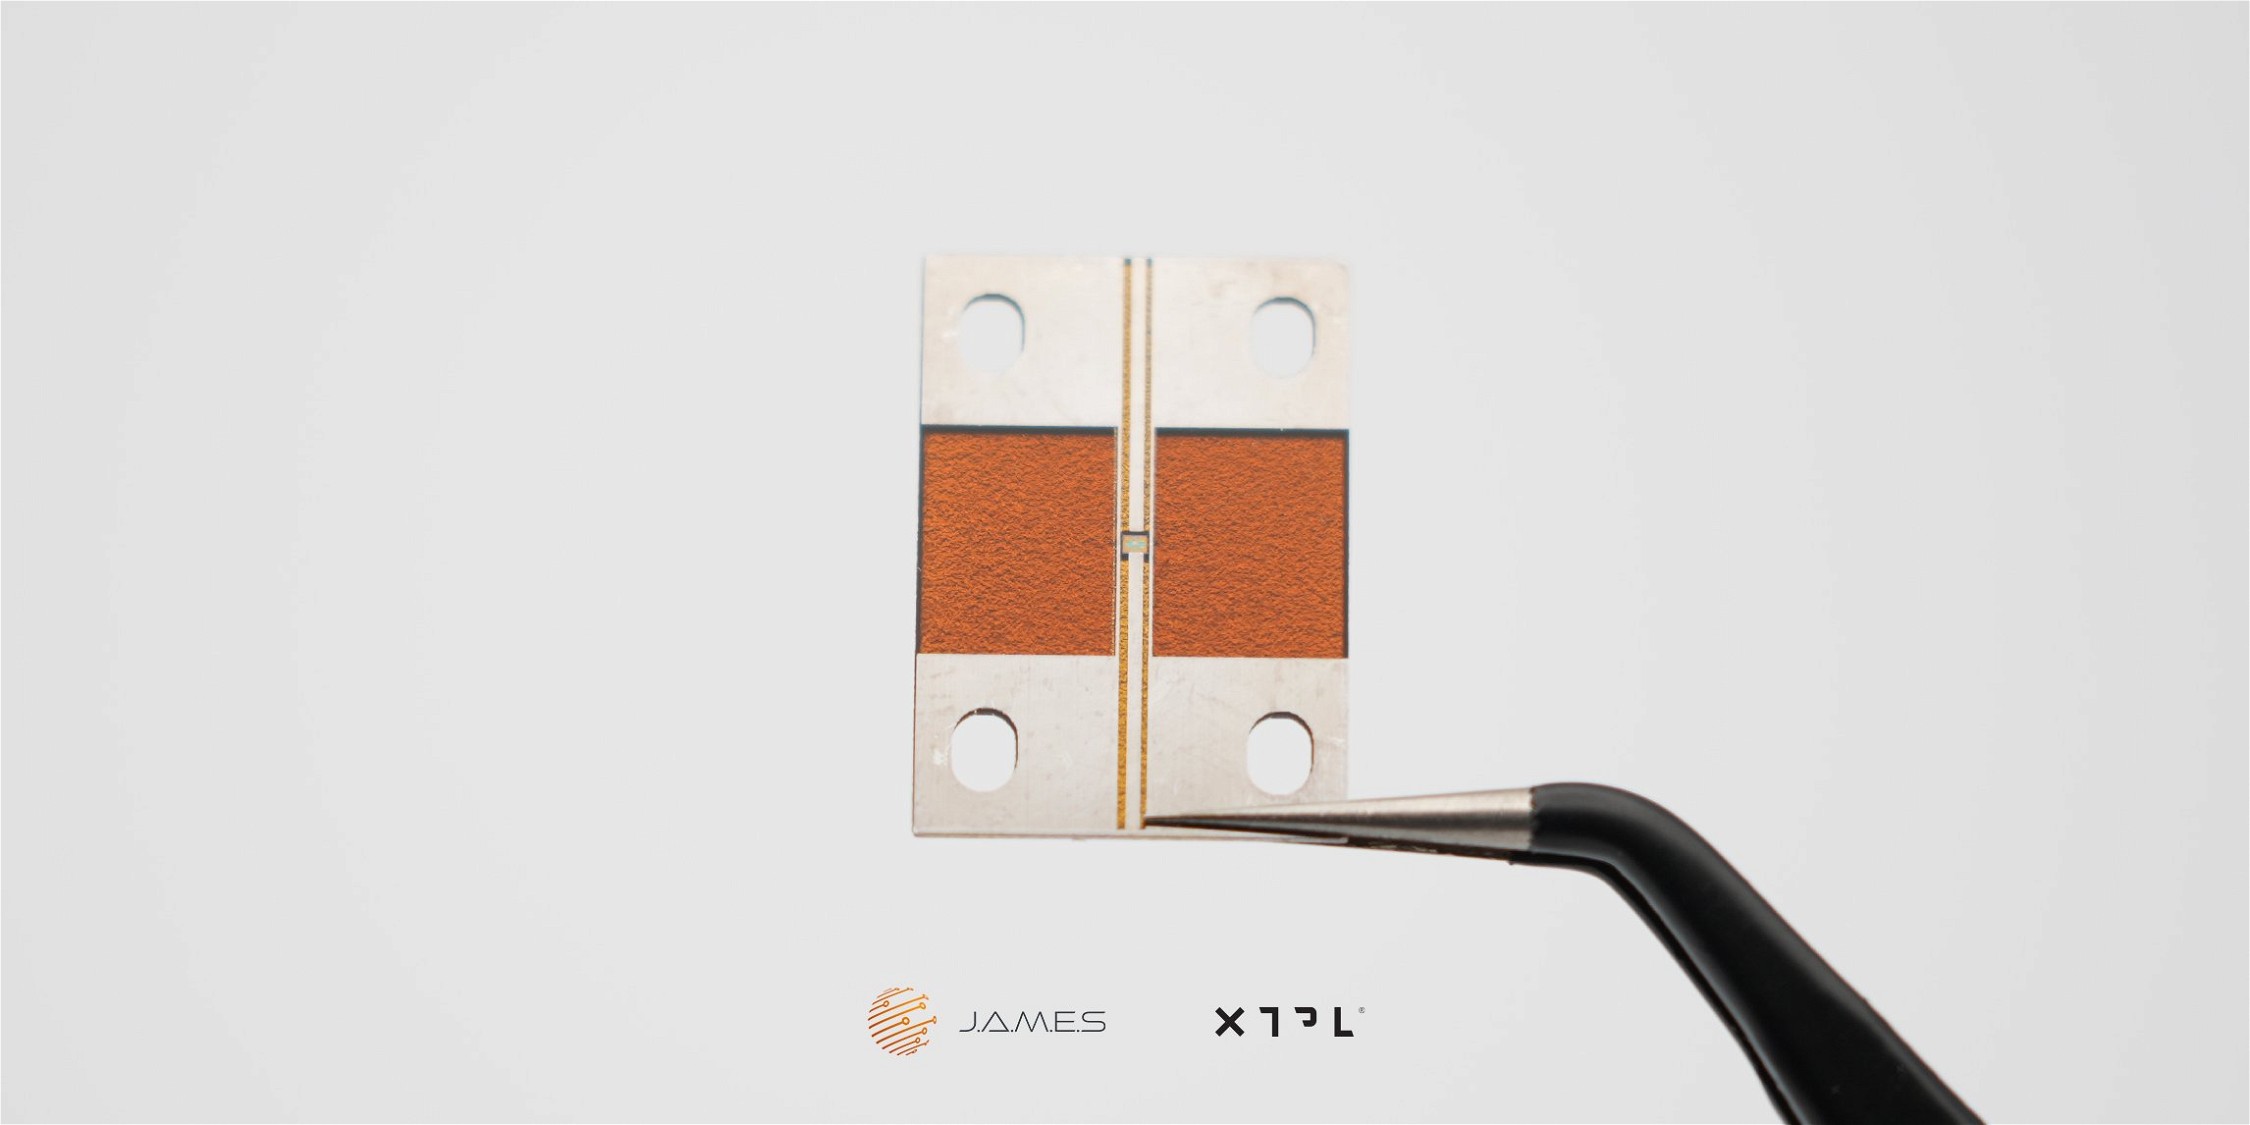 Breaking Update: J.A.M.E.S And XTPL Redefining 3D Manufacturing